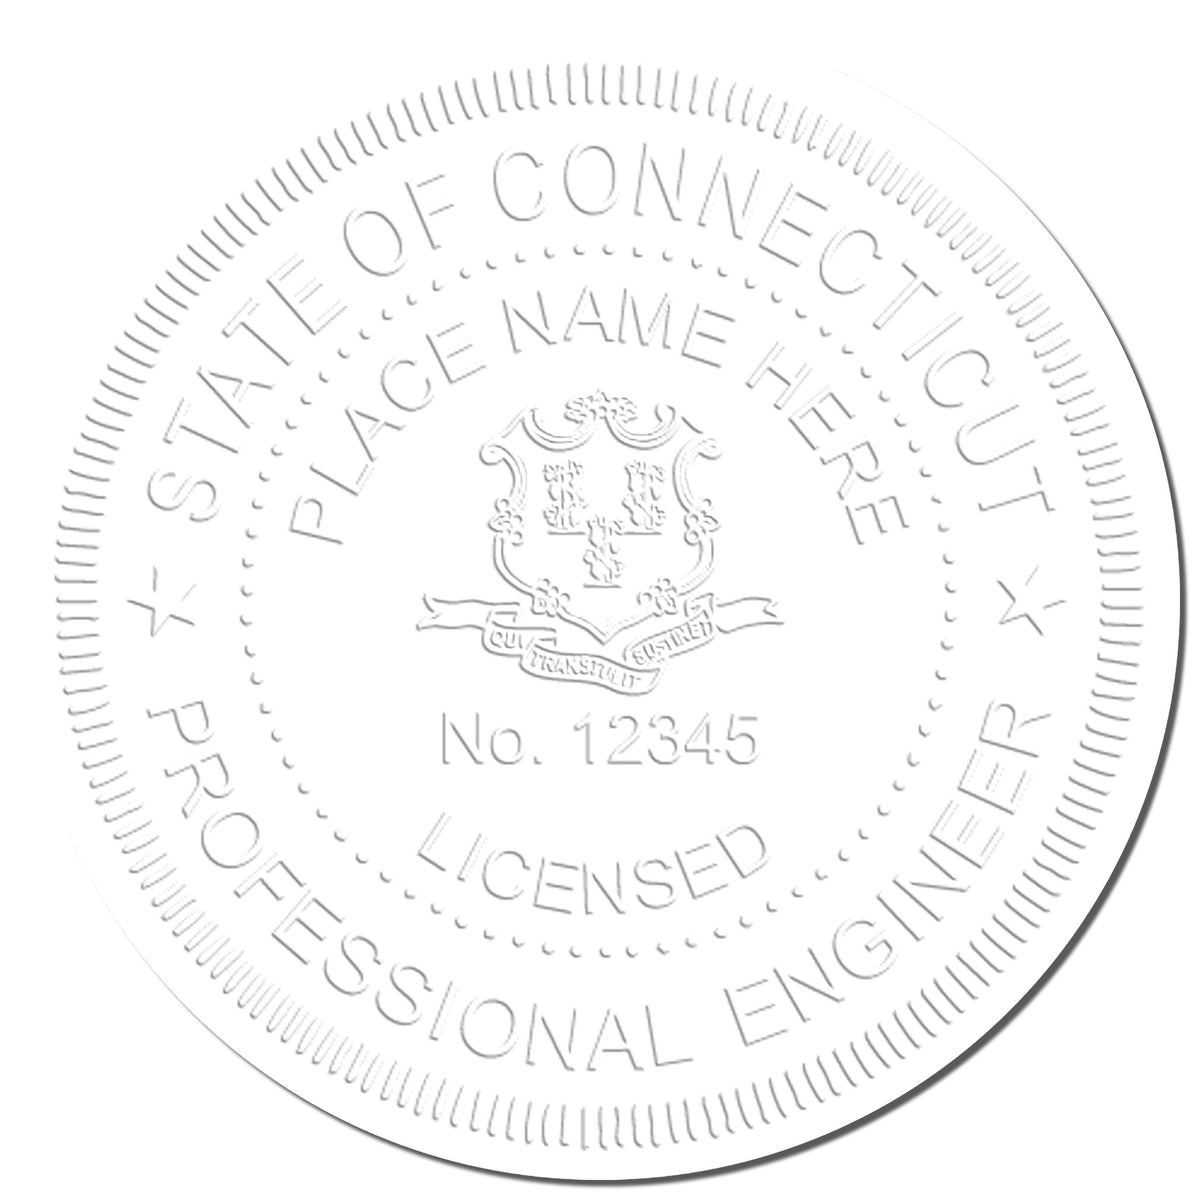 This paper is stamped with a sample imprint of the Hybrid Connecticut Engineer Seal, signifying its quality and reliability.